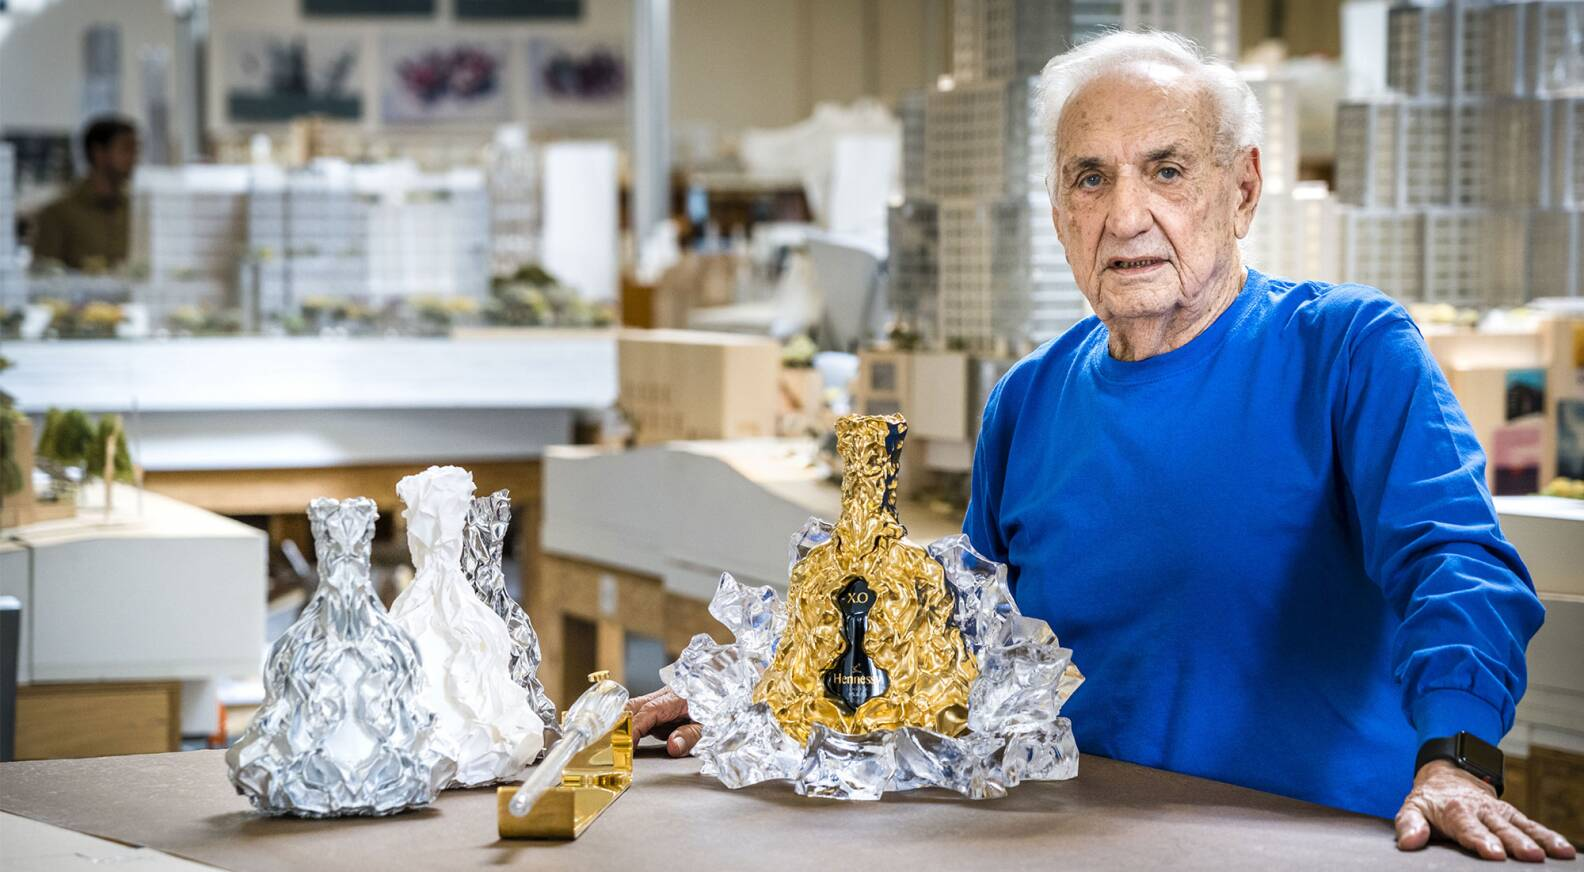 Frank gehry, one of the most famous architects